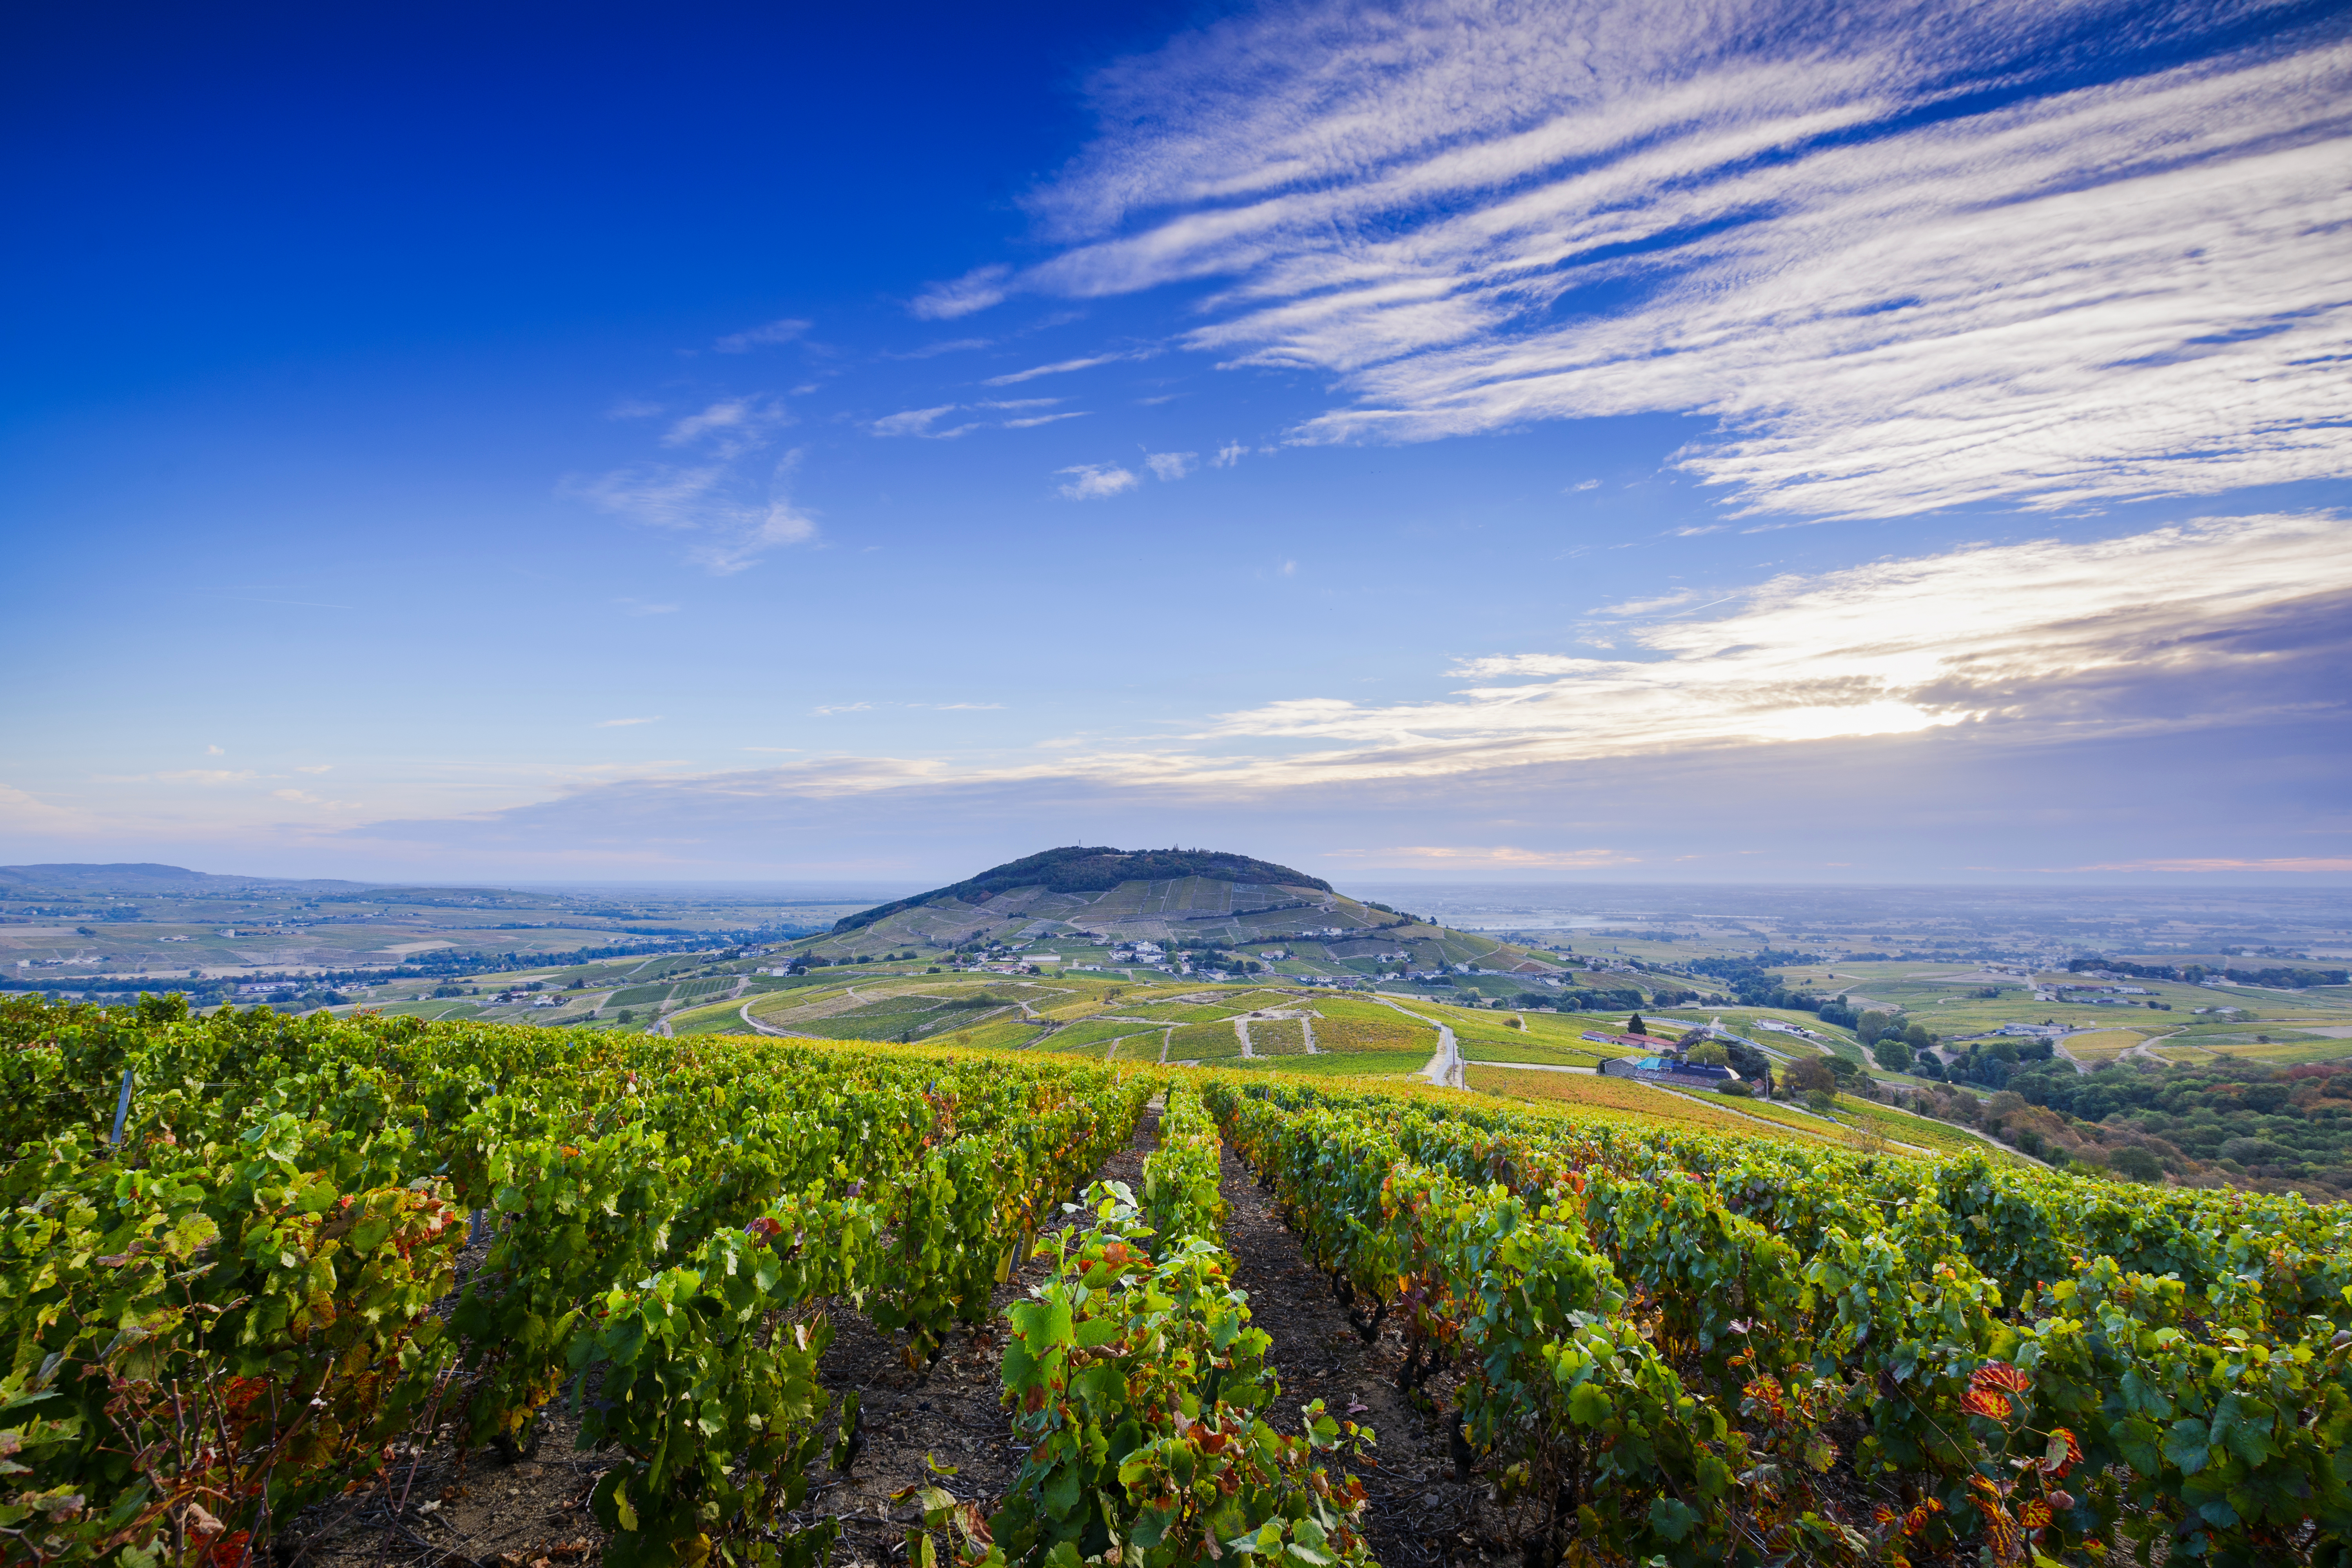 View of the Mont Brouilly hill and vineyards of the Beaujolais, France